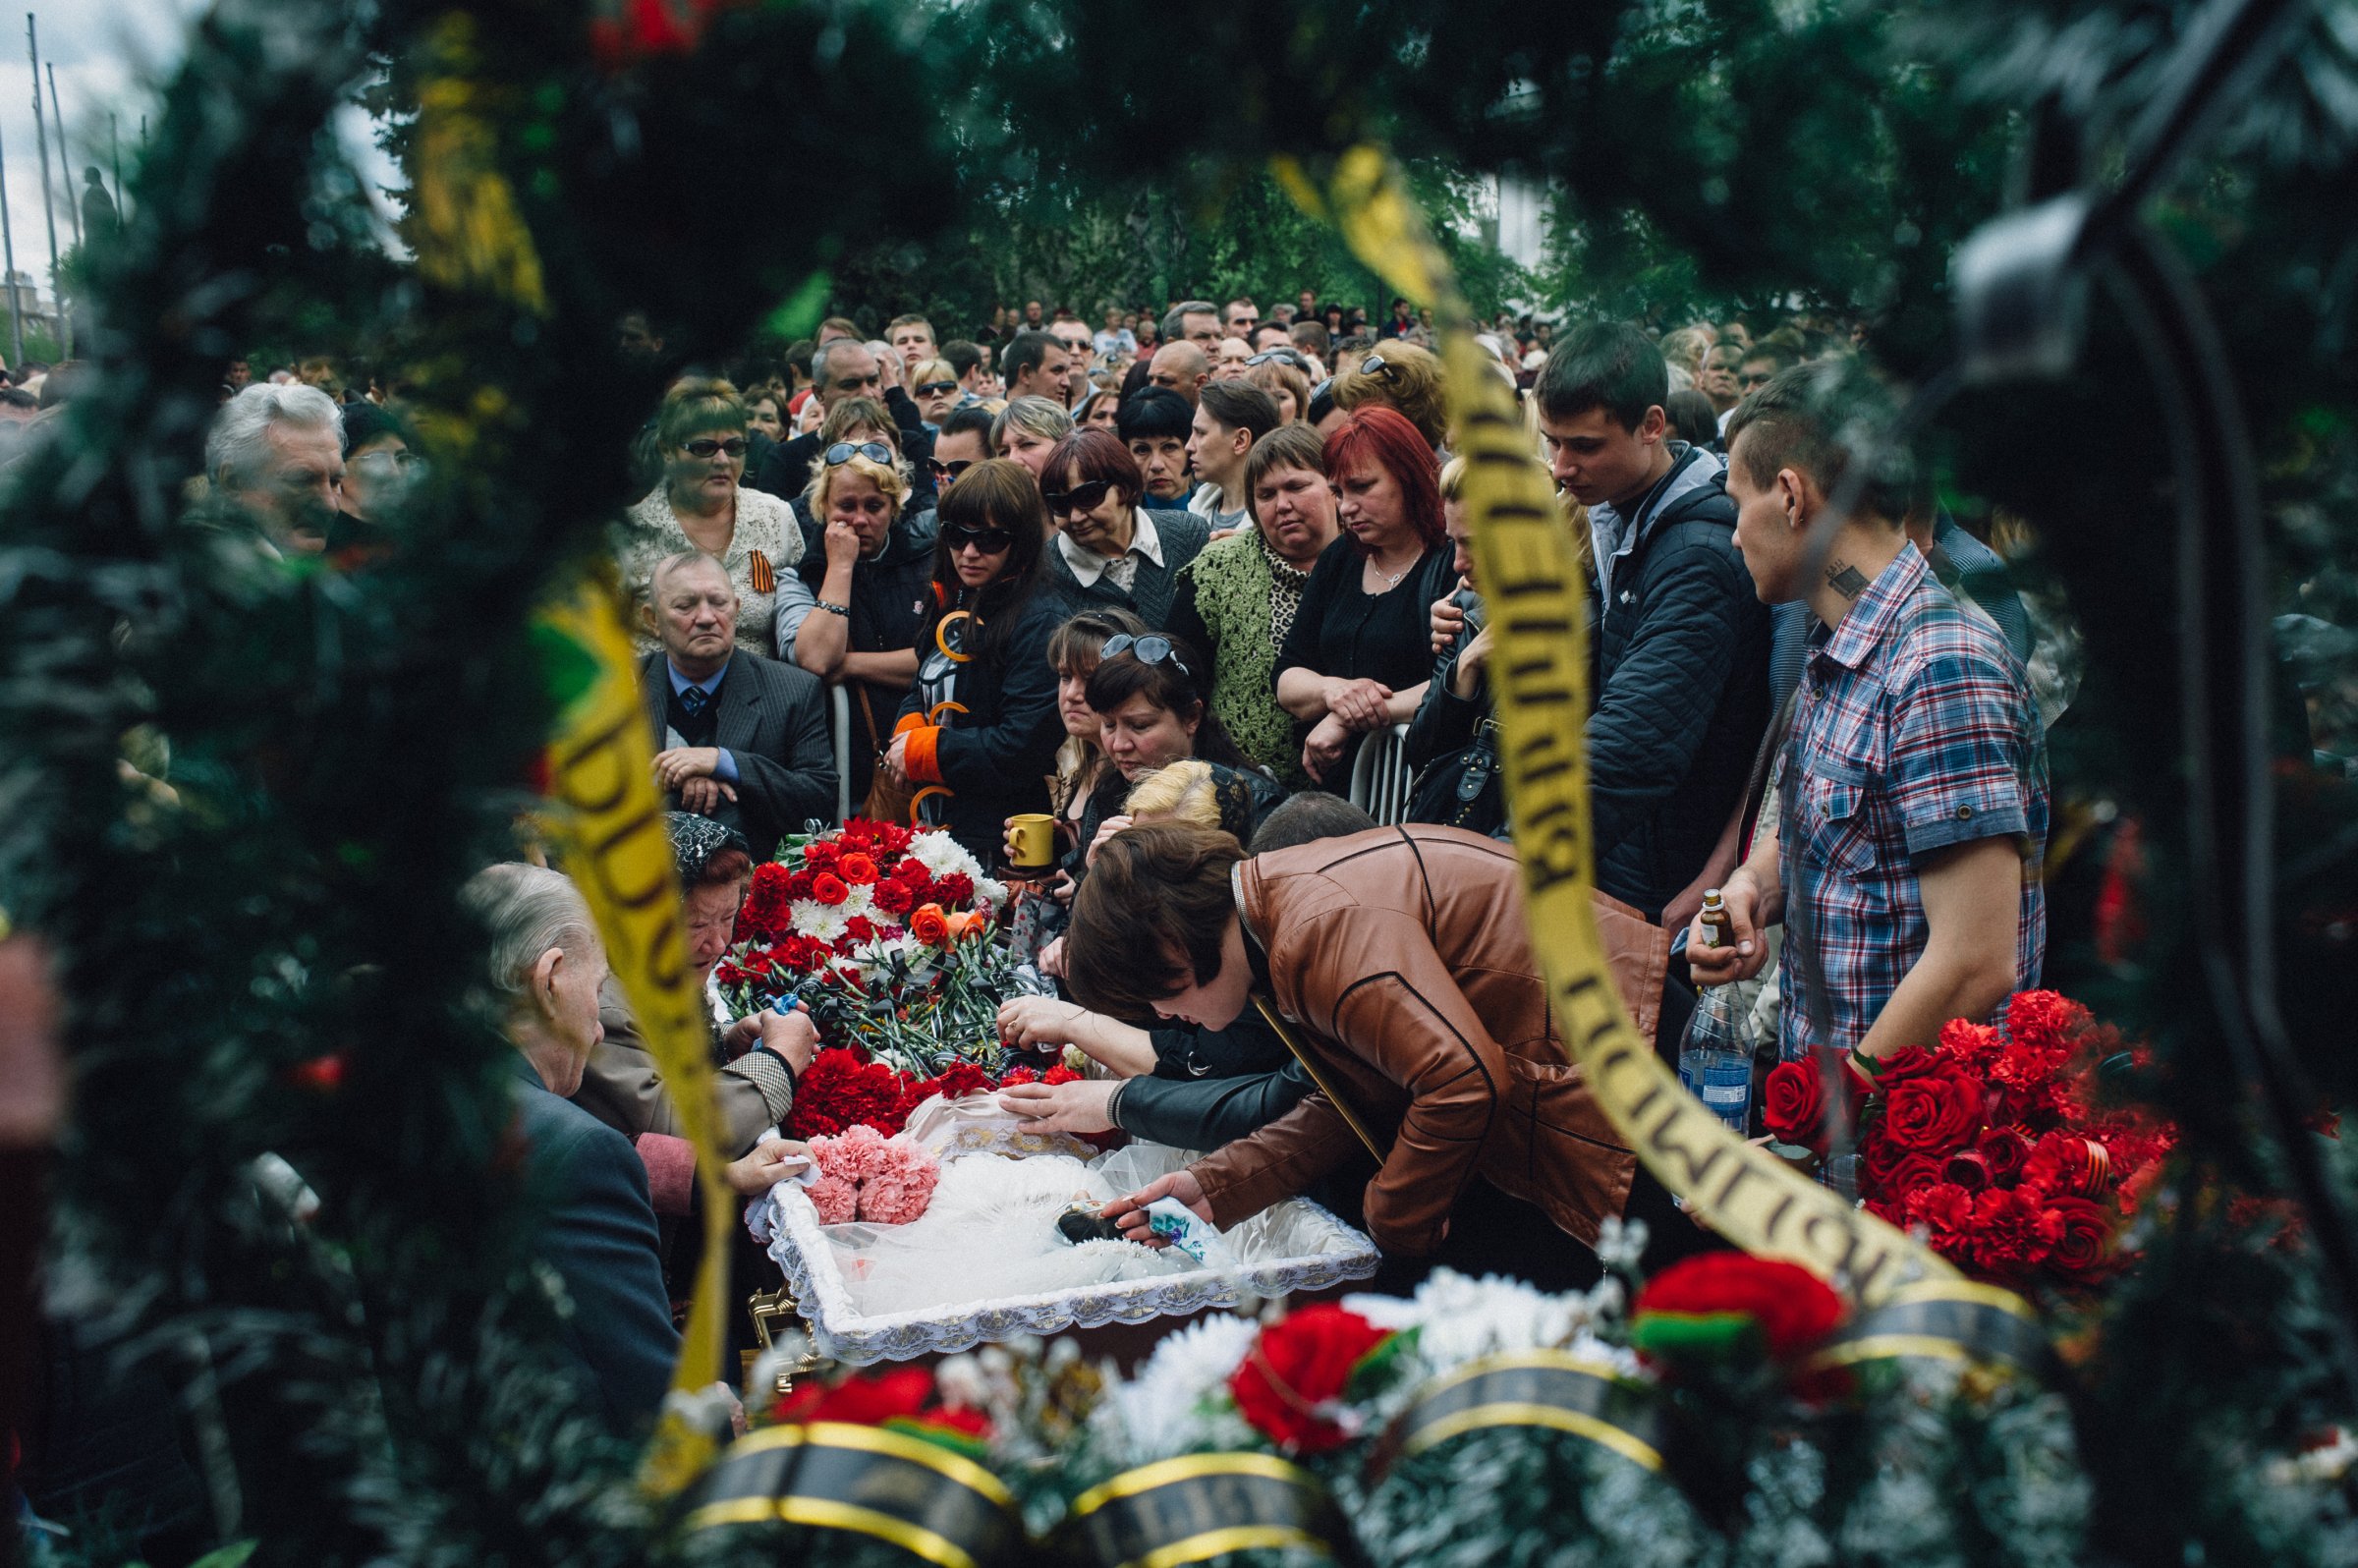 Kramatorsk, Ukraine. May 5, 2014. A funeral of a young girl age 21, Yulia Izotova in the central square in Kramatorsk. Witnesses say she was killed by shots from a Ukrainian military column on the road from Slaviansk to Kramatorsk, Kramatorsk, Maxim Dondyuk for TIME